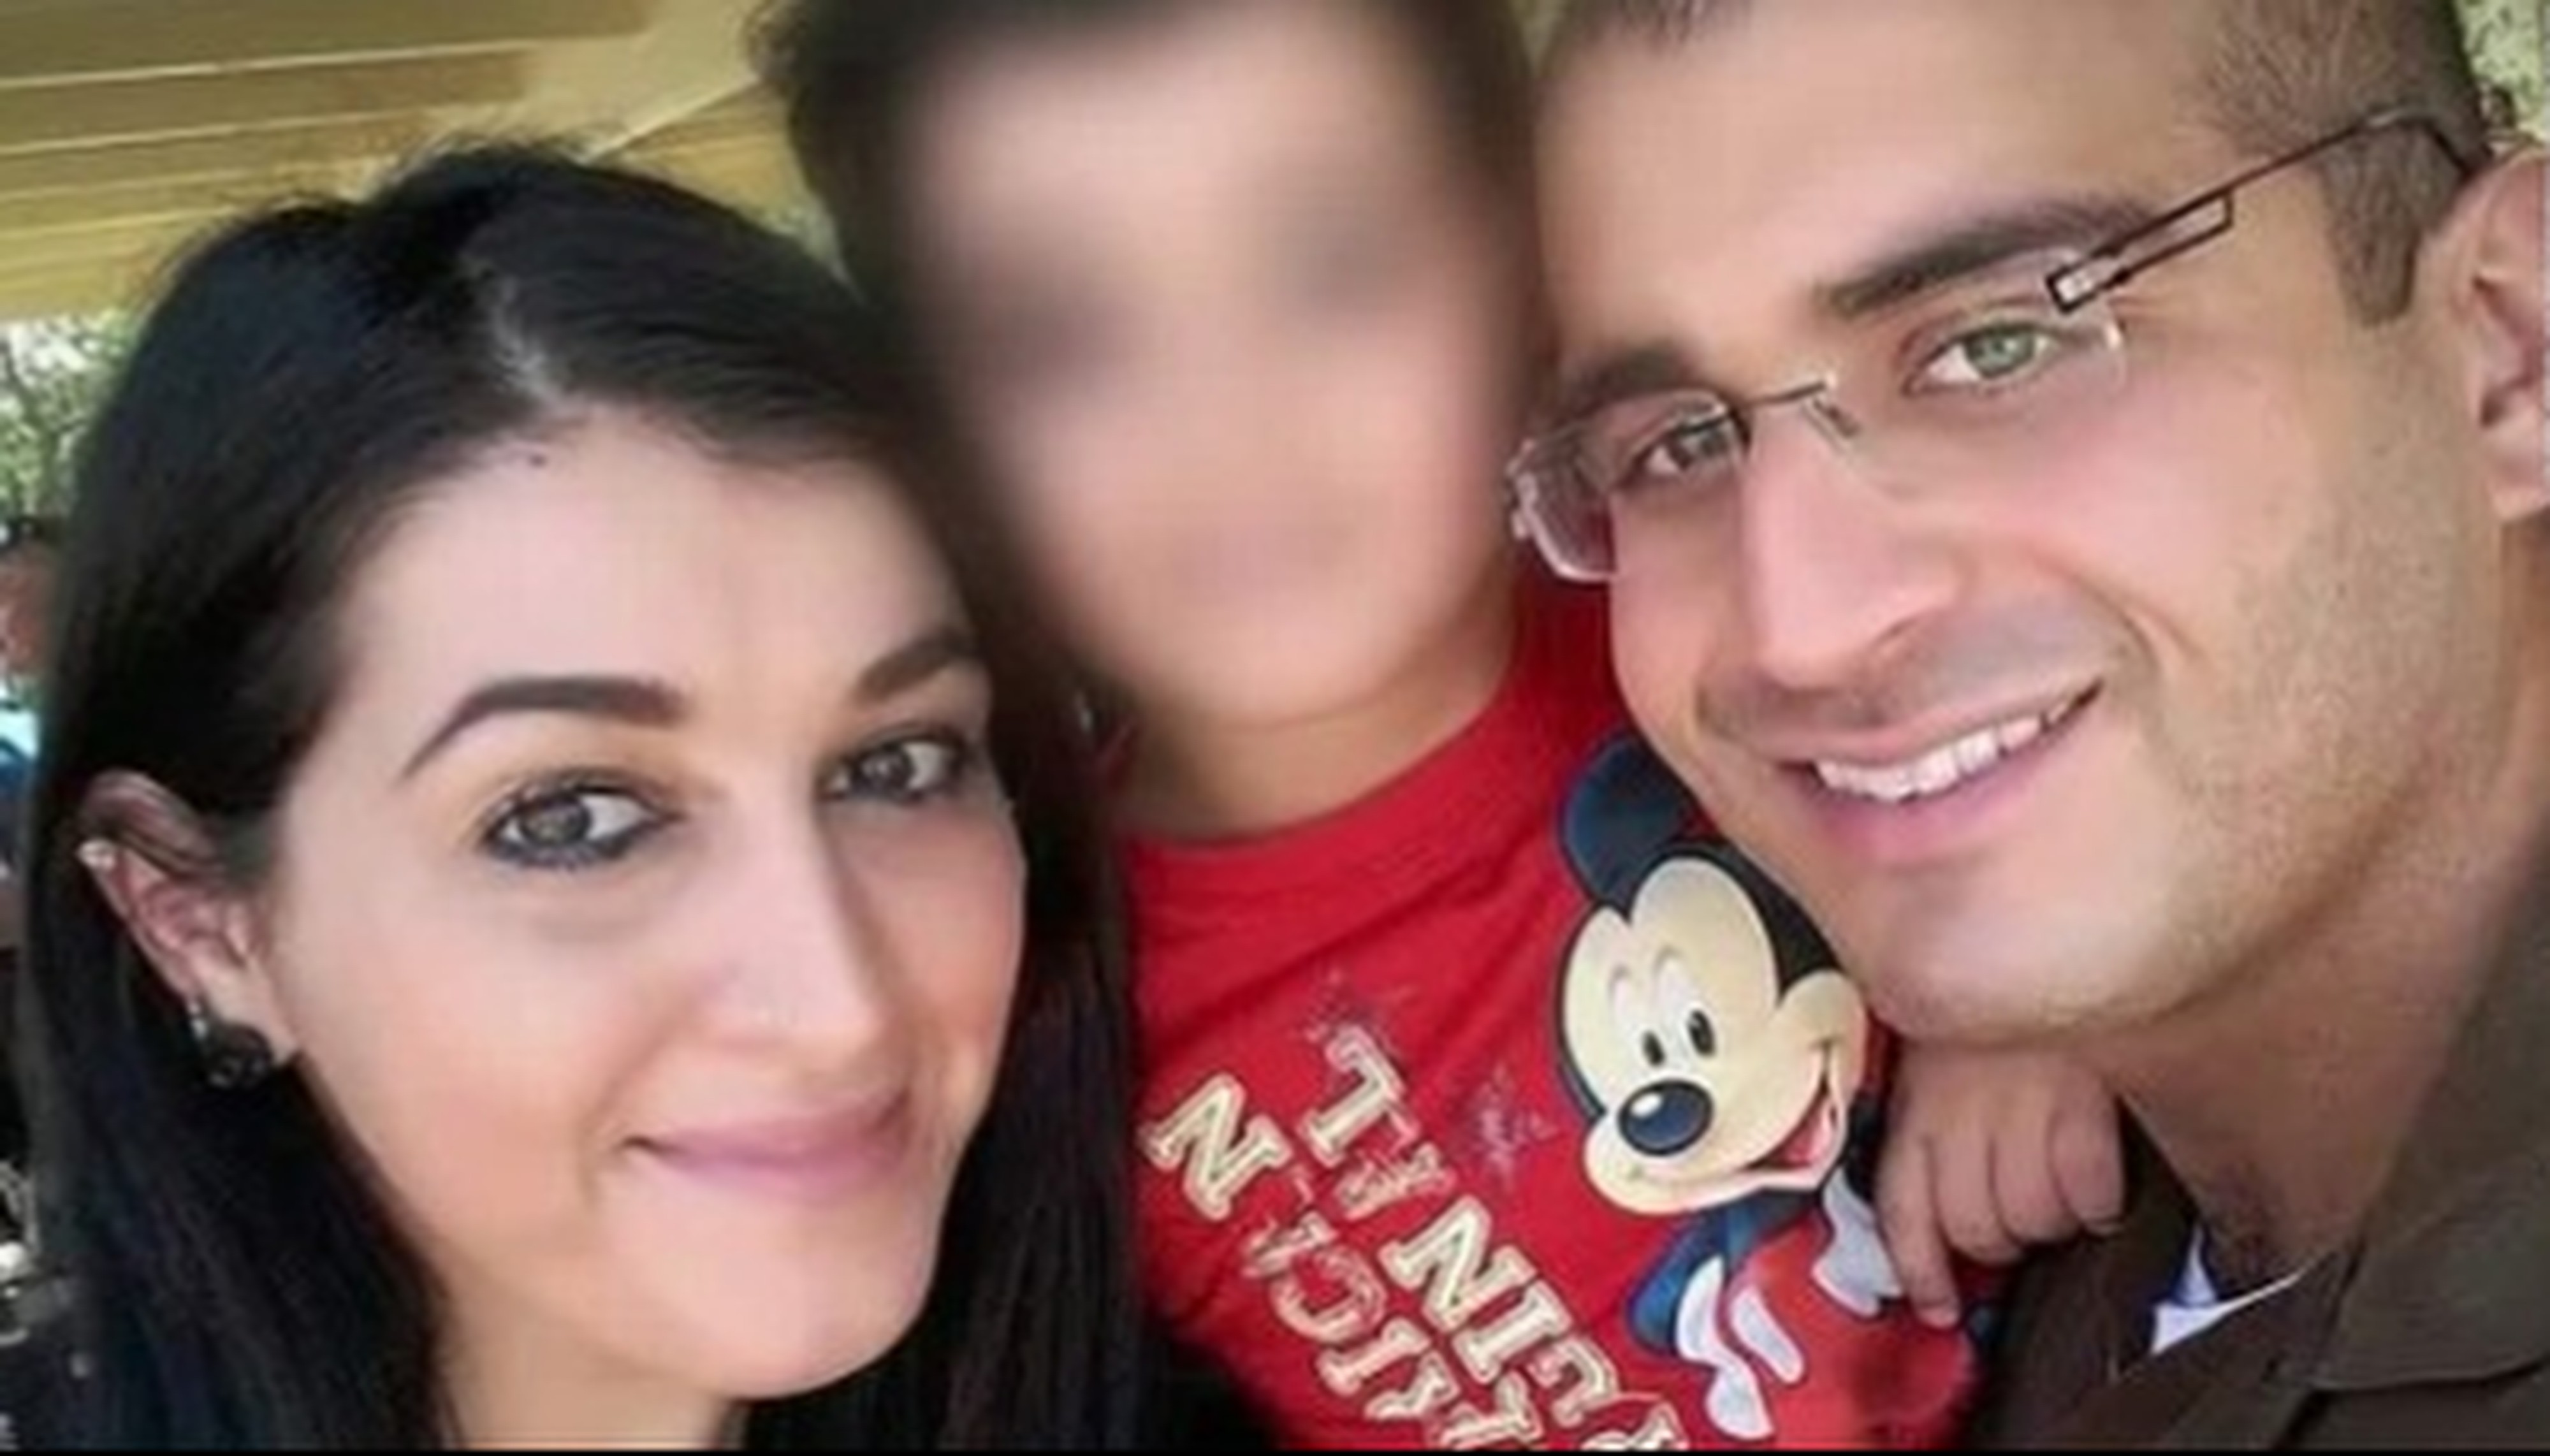 Omar Mir Seddique Mateen, who killed 49 people in an attack on Orlando, Florida, nightclub in 2016, poses with his wife, Noor Salman, in a family photo. Photo: Handout